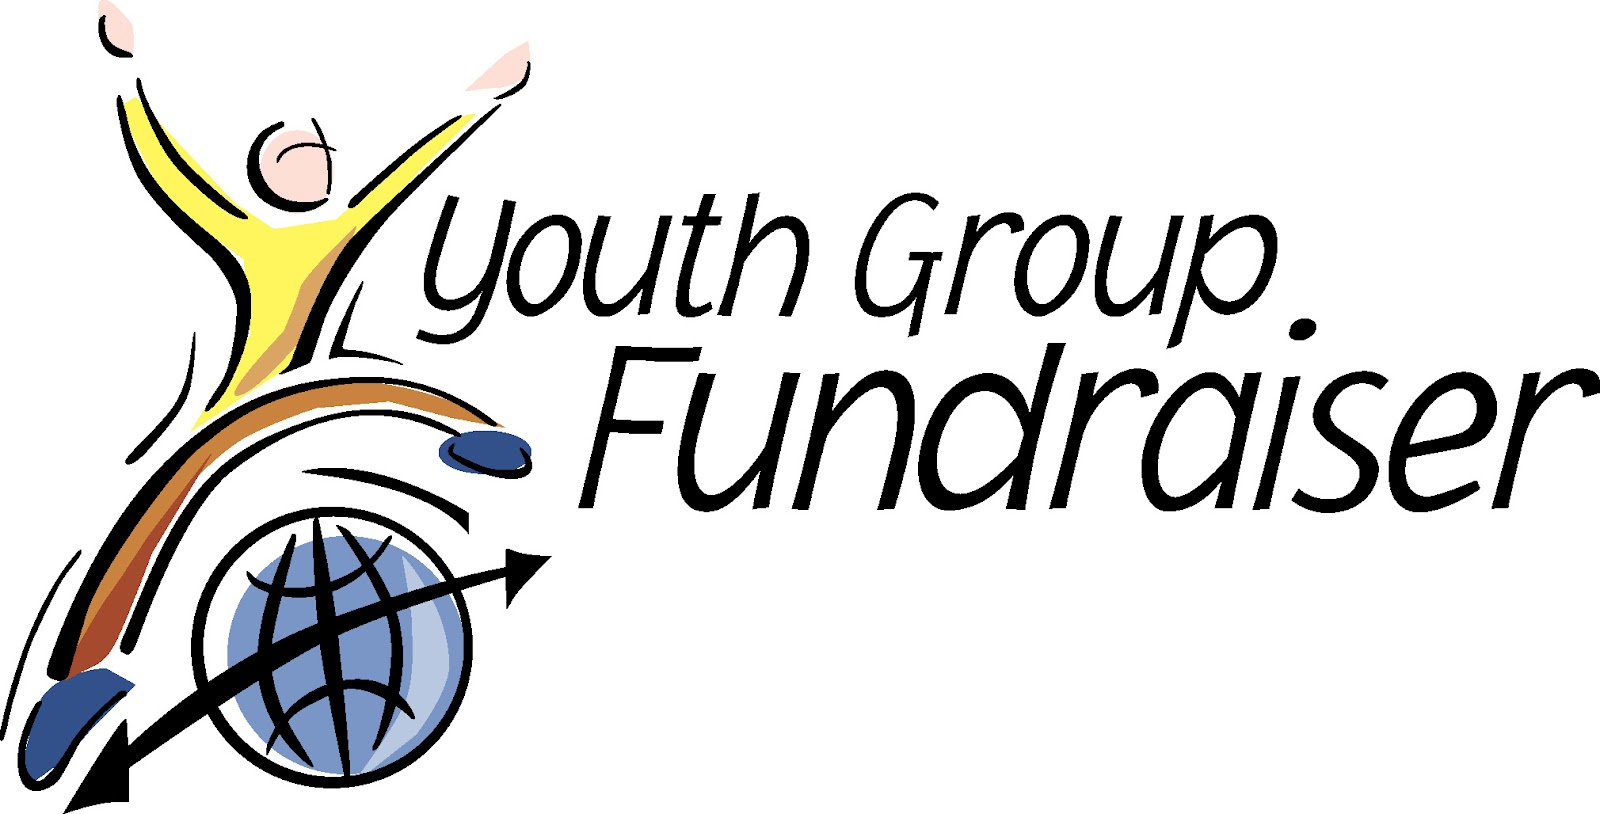 youth group fundraiser